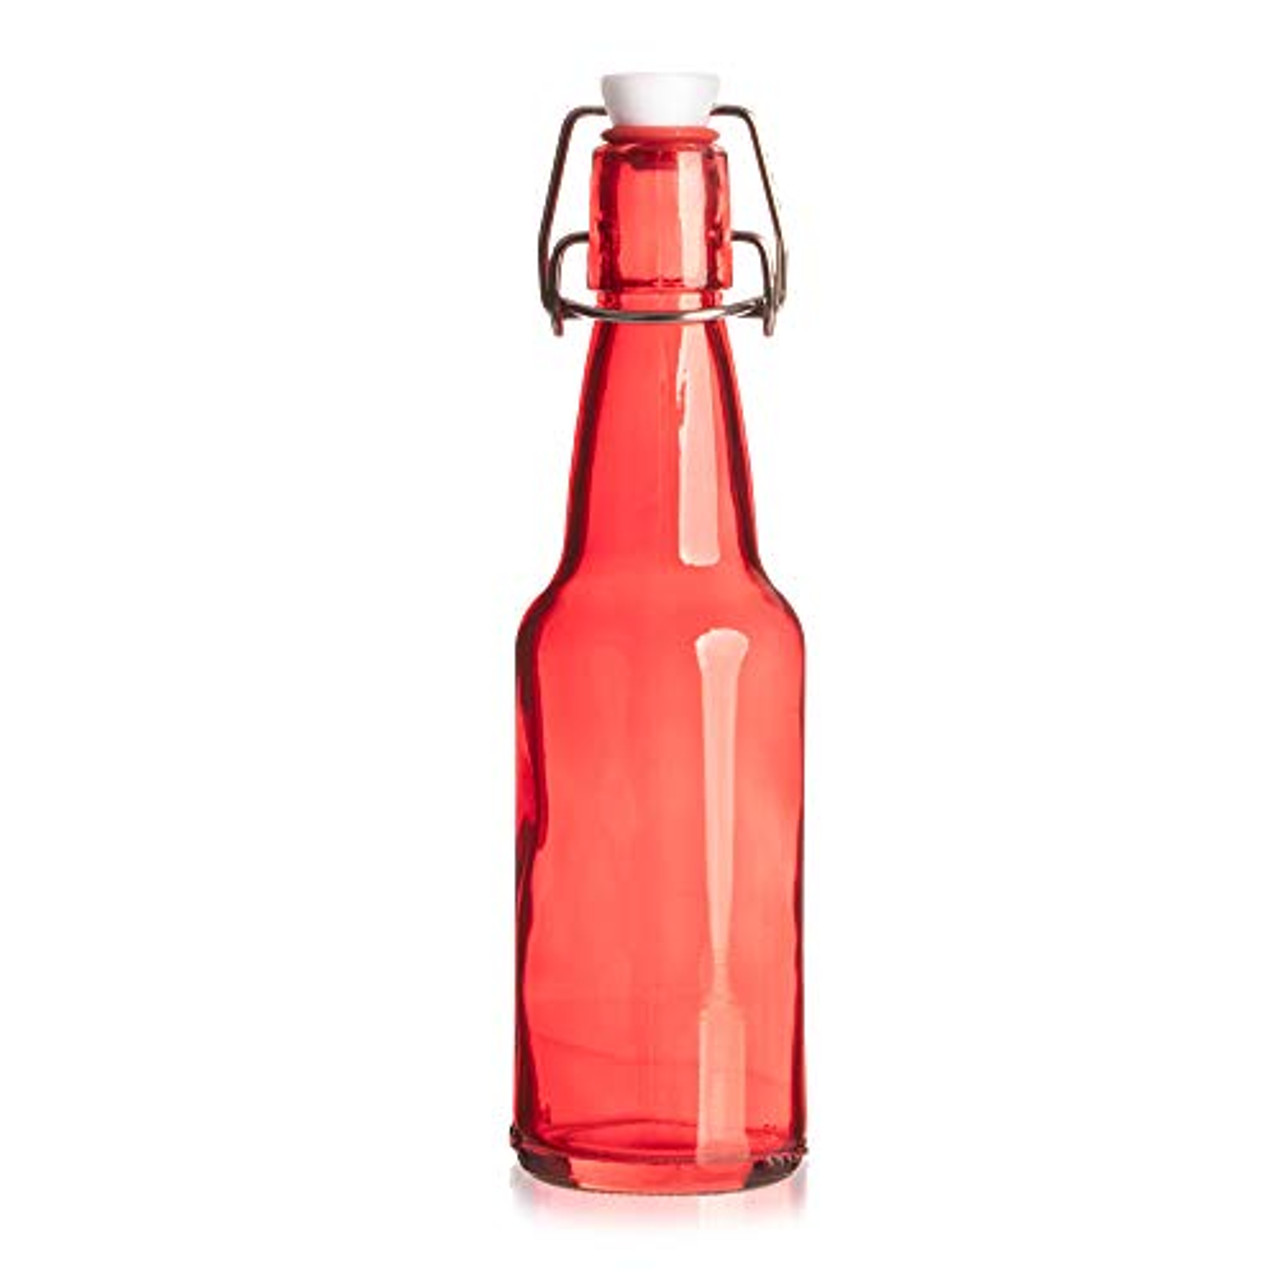 1 Liter Glass Bottle Flip Top Glass Growlers for Beer 64 Oz Growler Set  with Lids Great for Home Brewing, Kombucha & More - China Wine Bottle, Glass  Wine Bottle